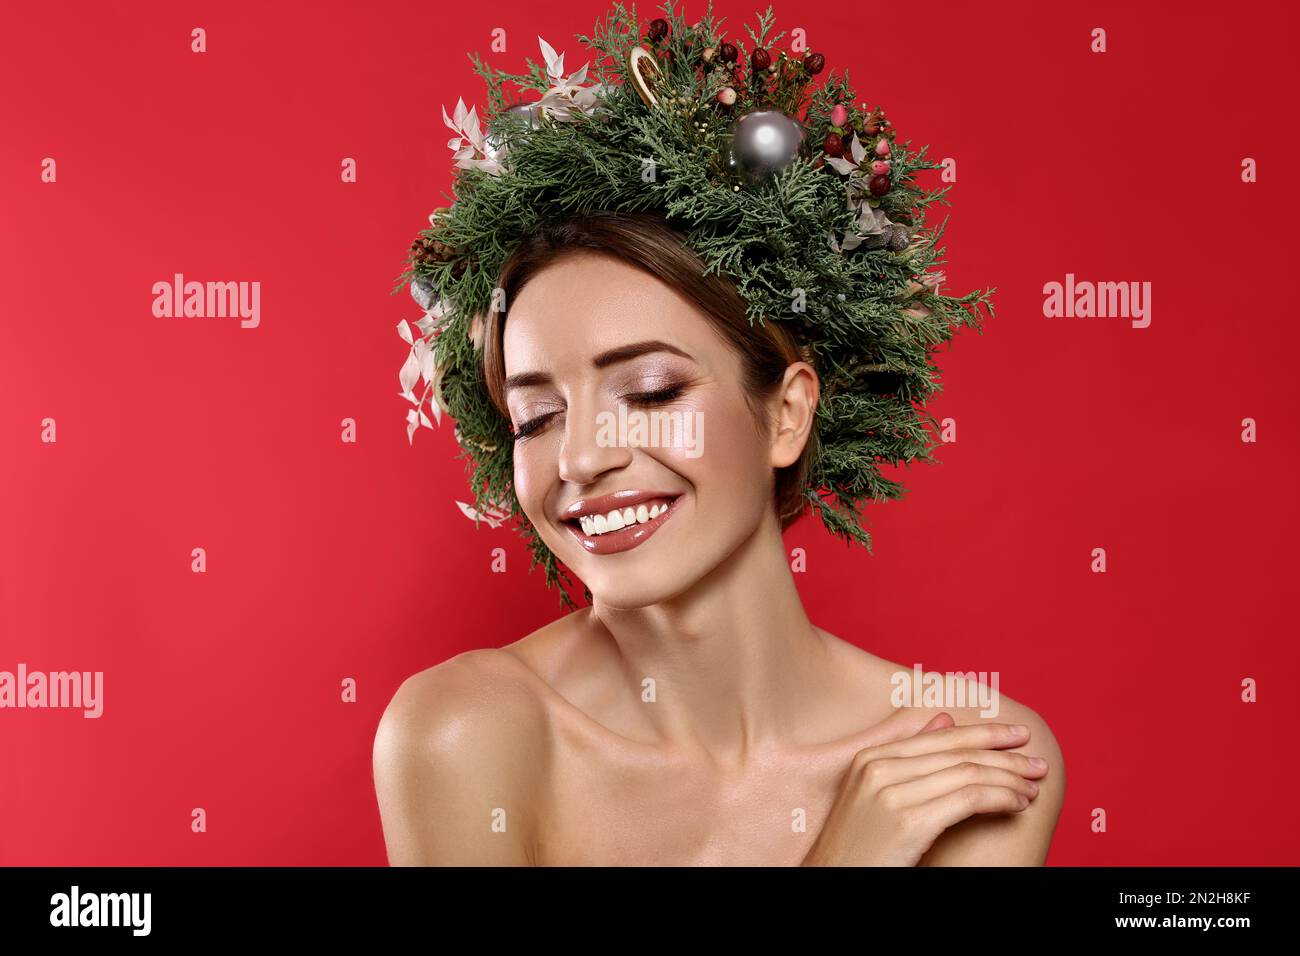 Beautiful young woman wearing Christmas wreath on red background Stock Photo